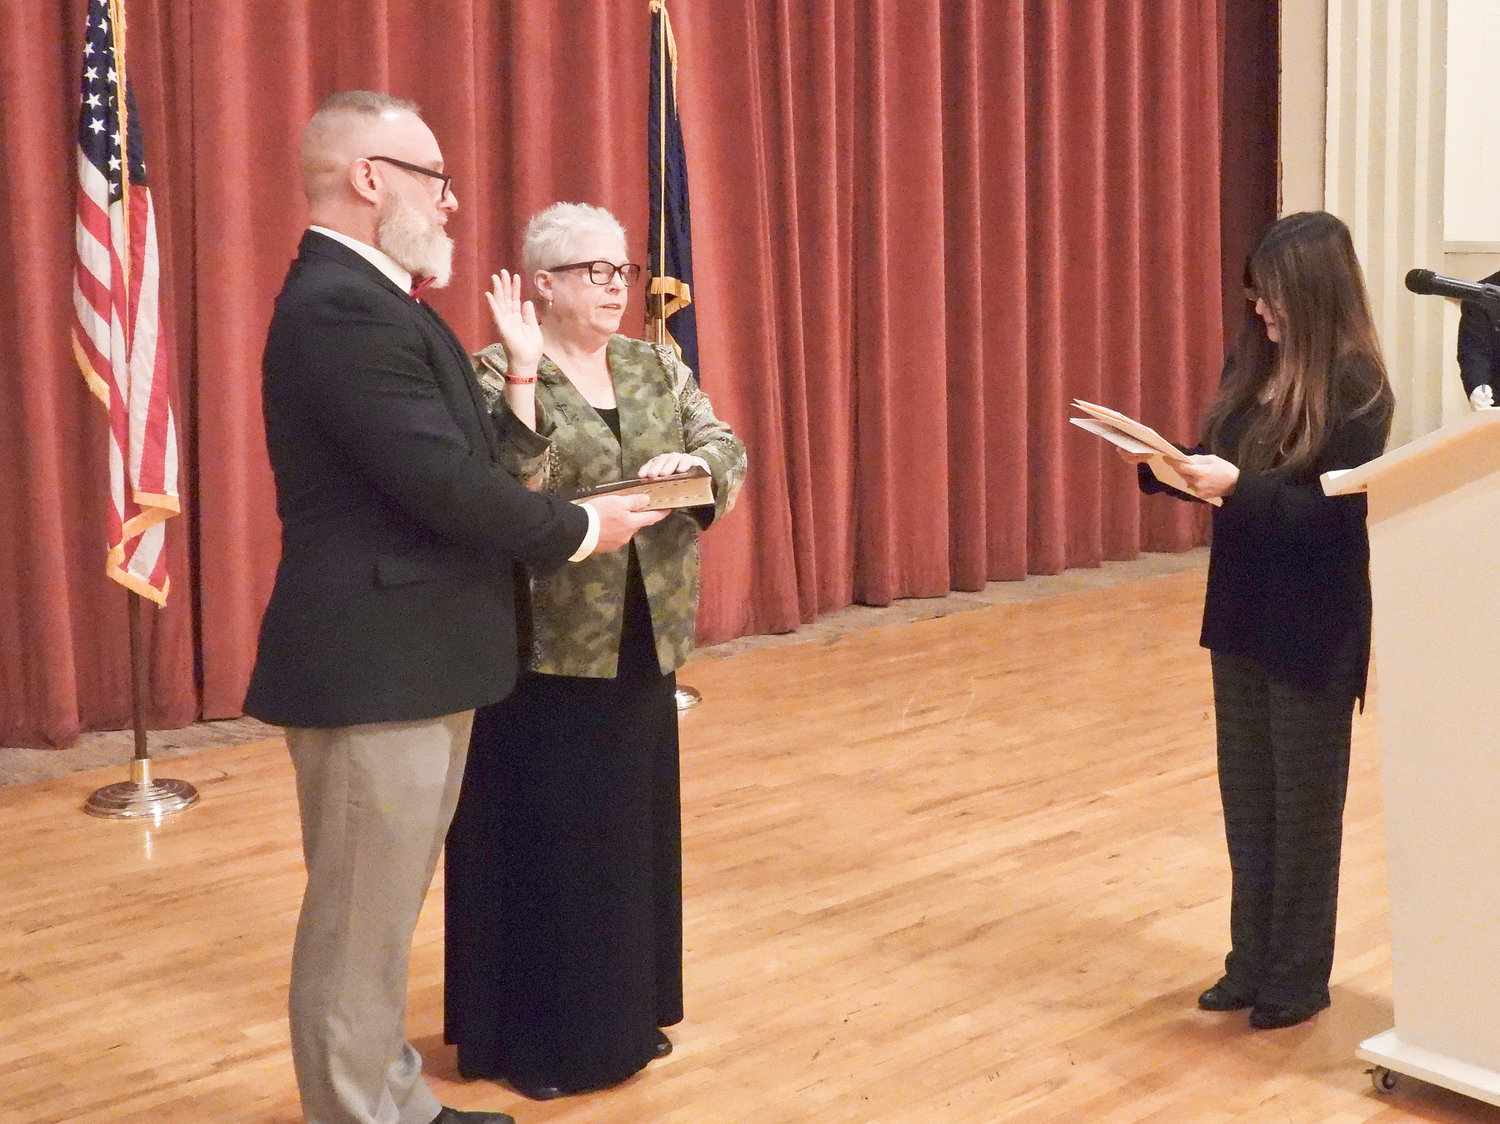 TWO MORE YEARS — Helen Acker is sworn in as Oneida's mayor for another two years at the inauguration ceremony on Sunday. Acker's son and master of ceremonies, Justin Acker, holds the bible for her as she takes the oath of Office.